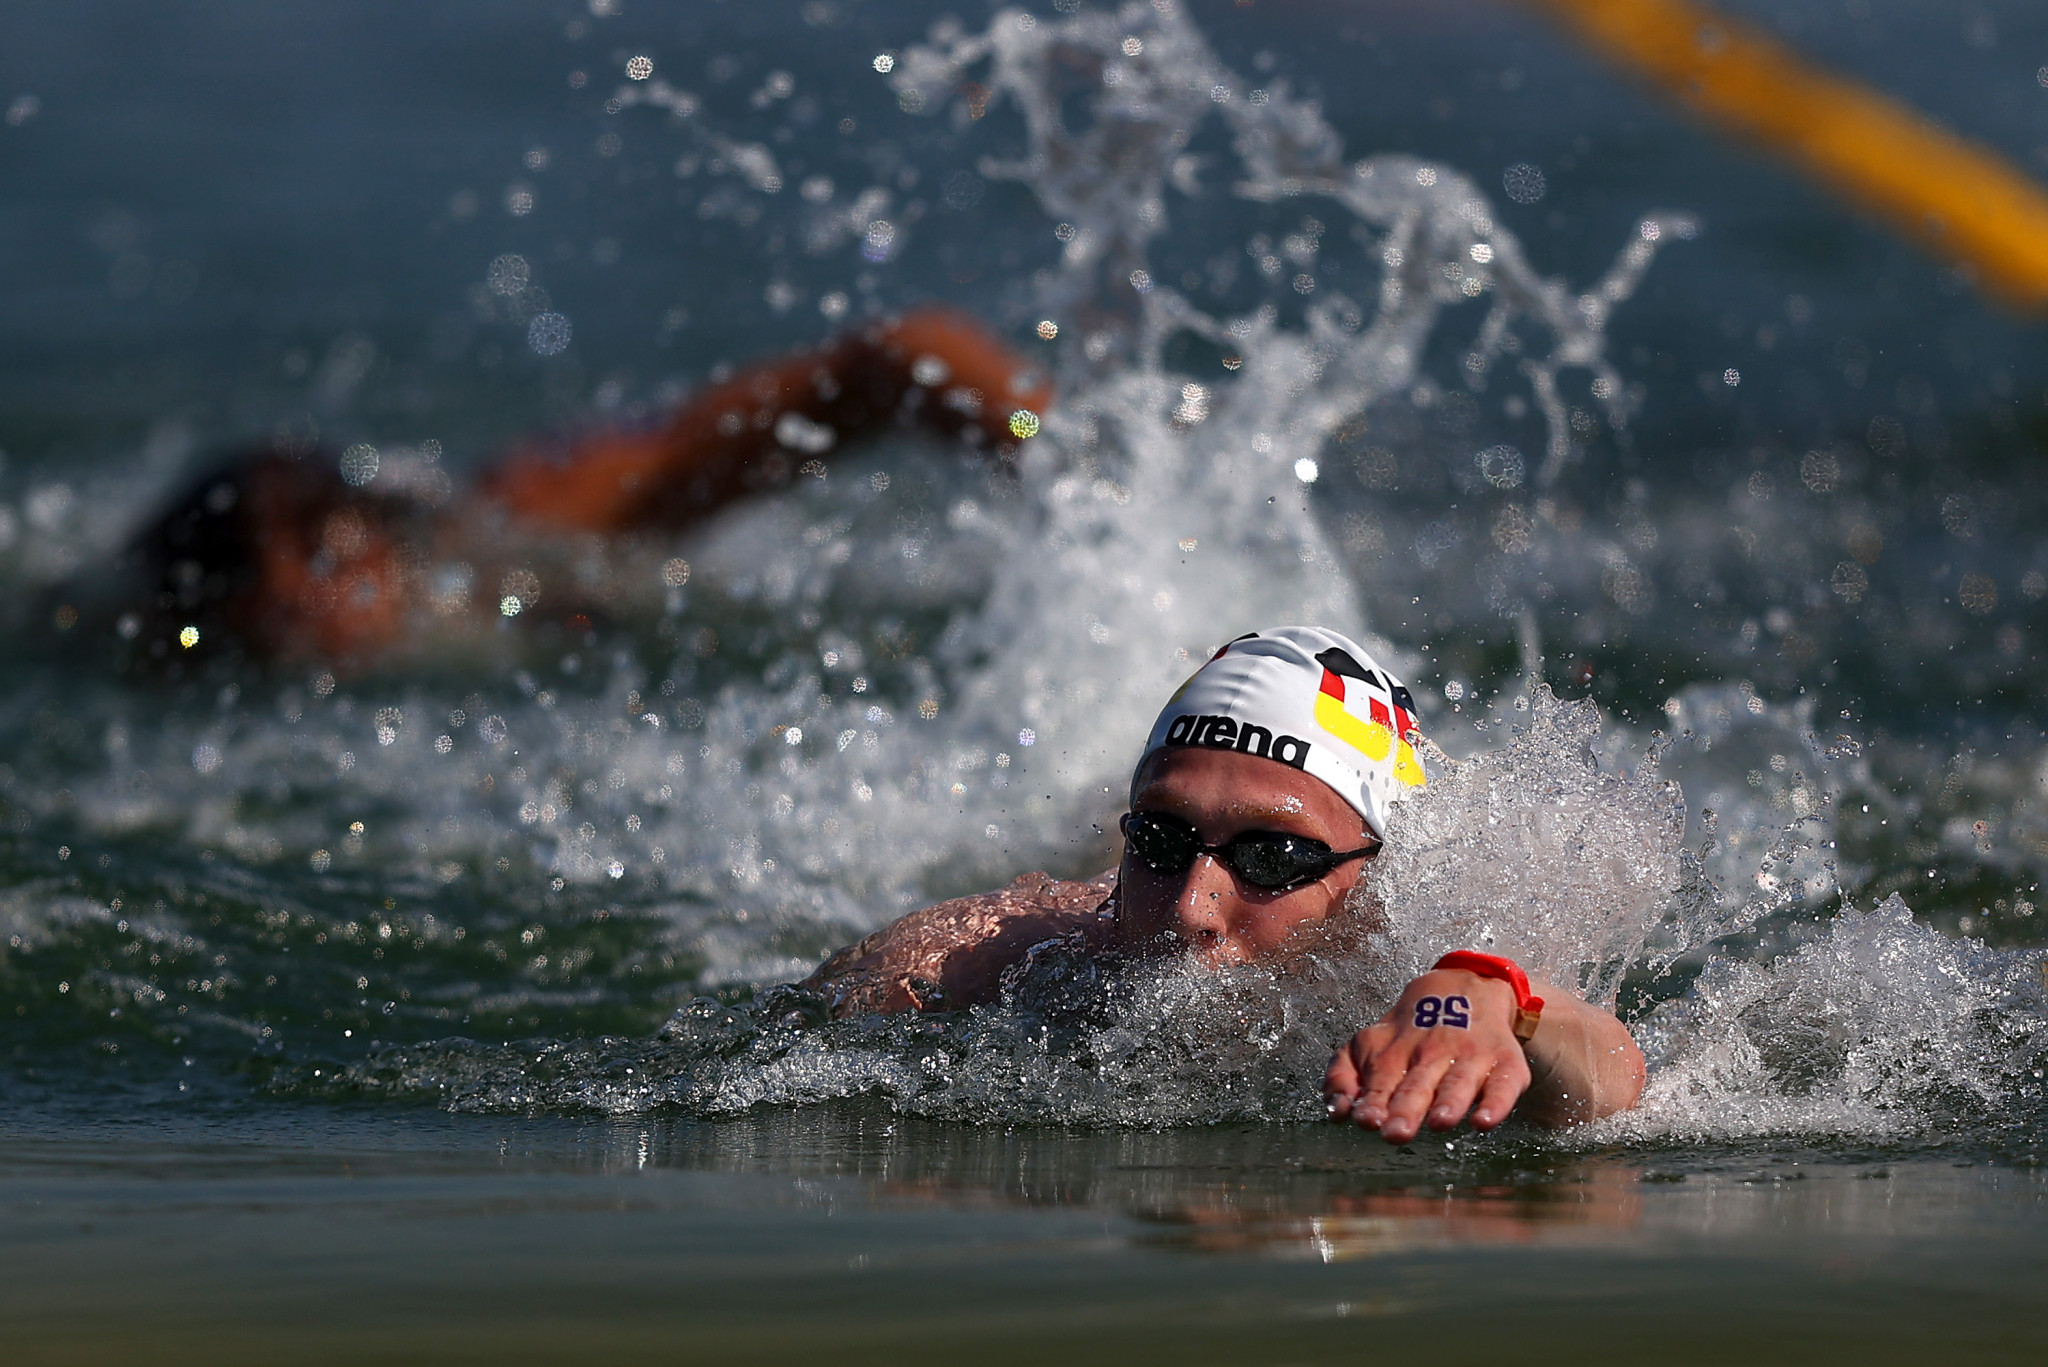 Olympic gold medallists Wellbrock and Cunha triumph in 5km open water swimming races